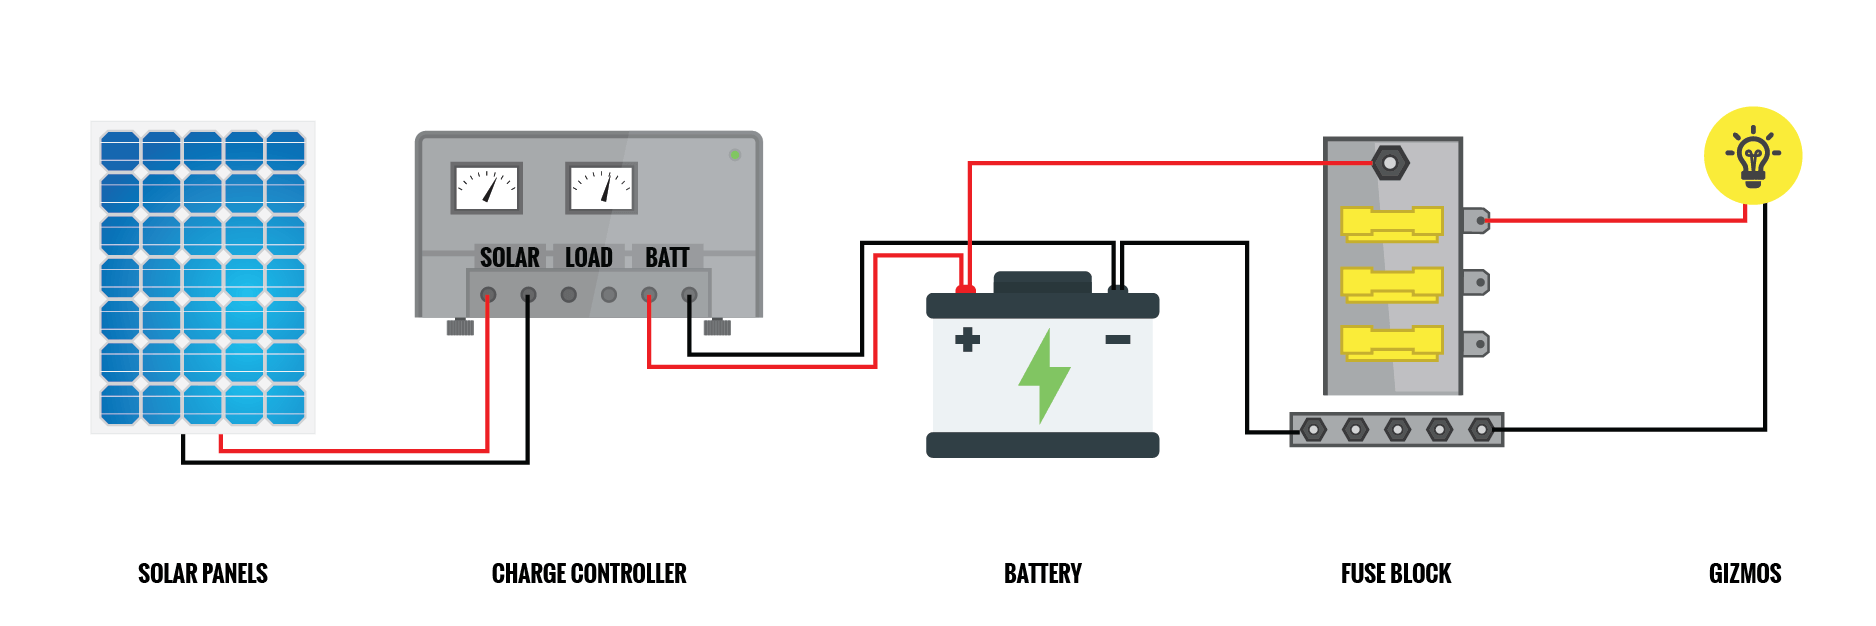 wiring diagram for a diy solar charge controller in an rv or camper van conversion